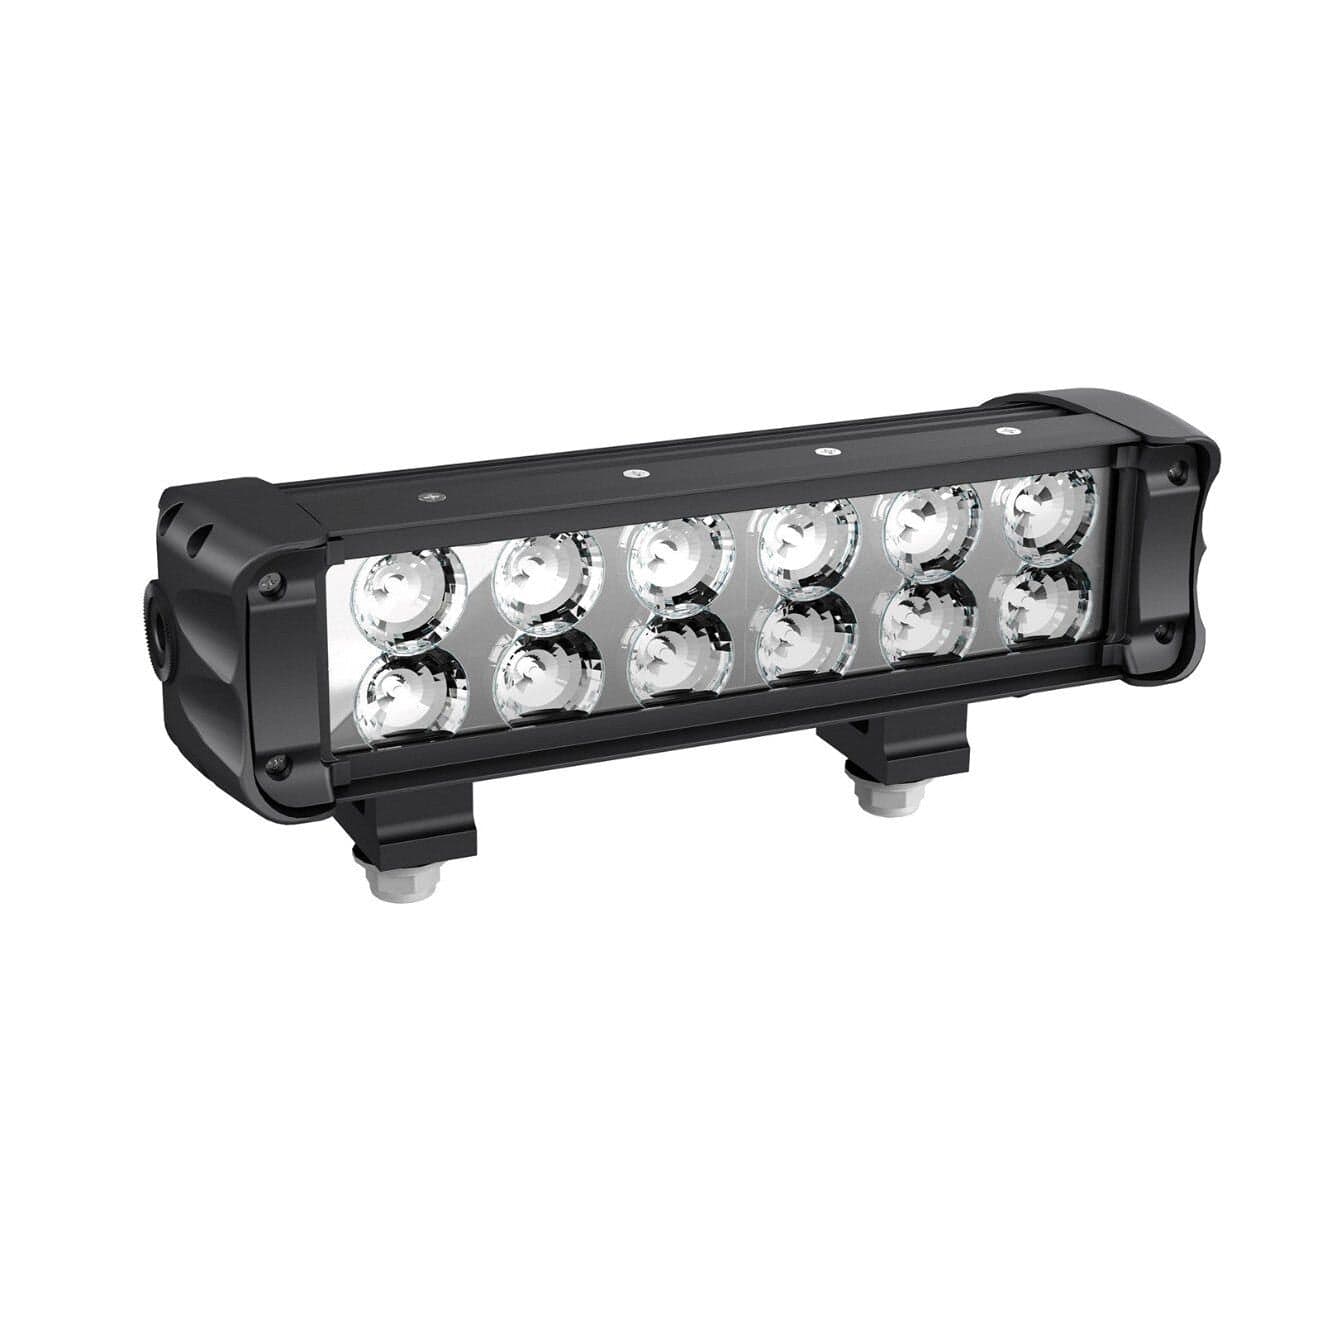 10â€³ (25 cm) Double Stacked LED Light Bar (60W)